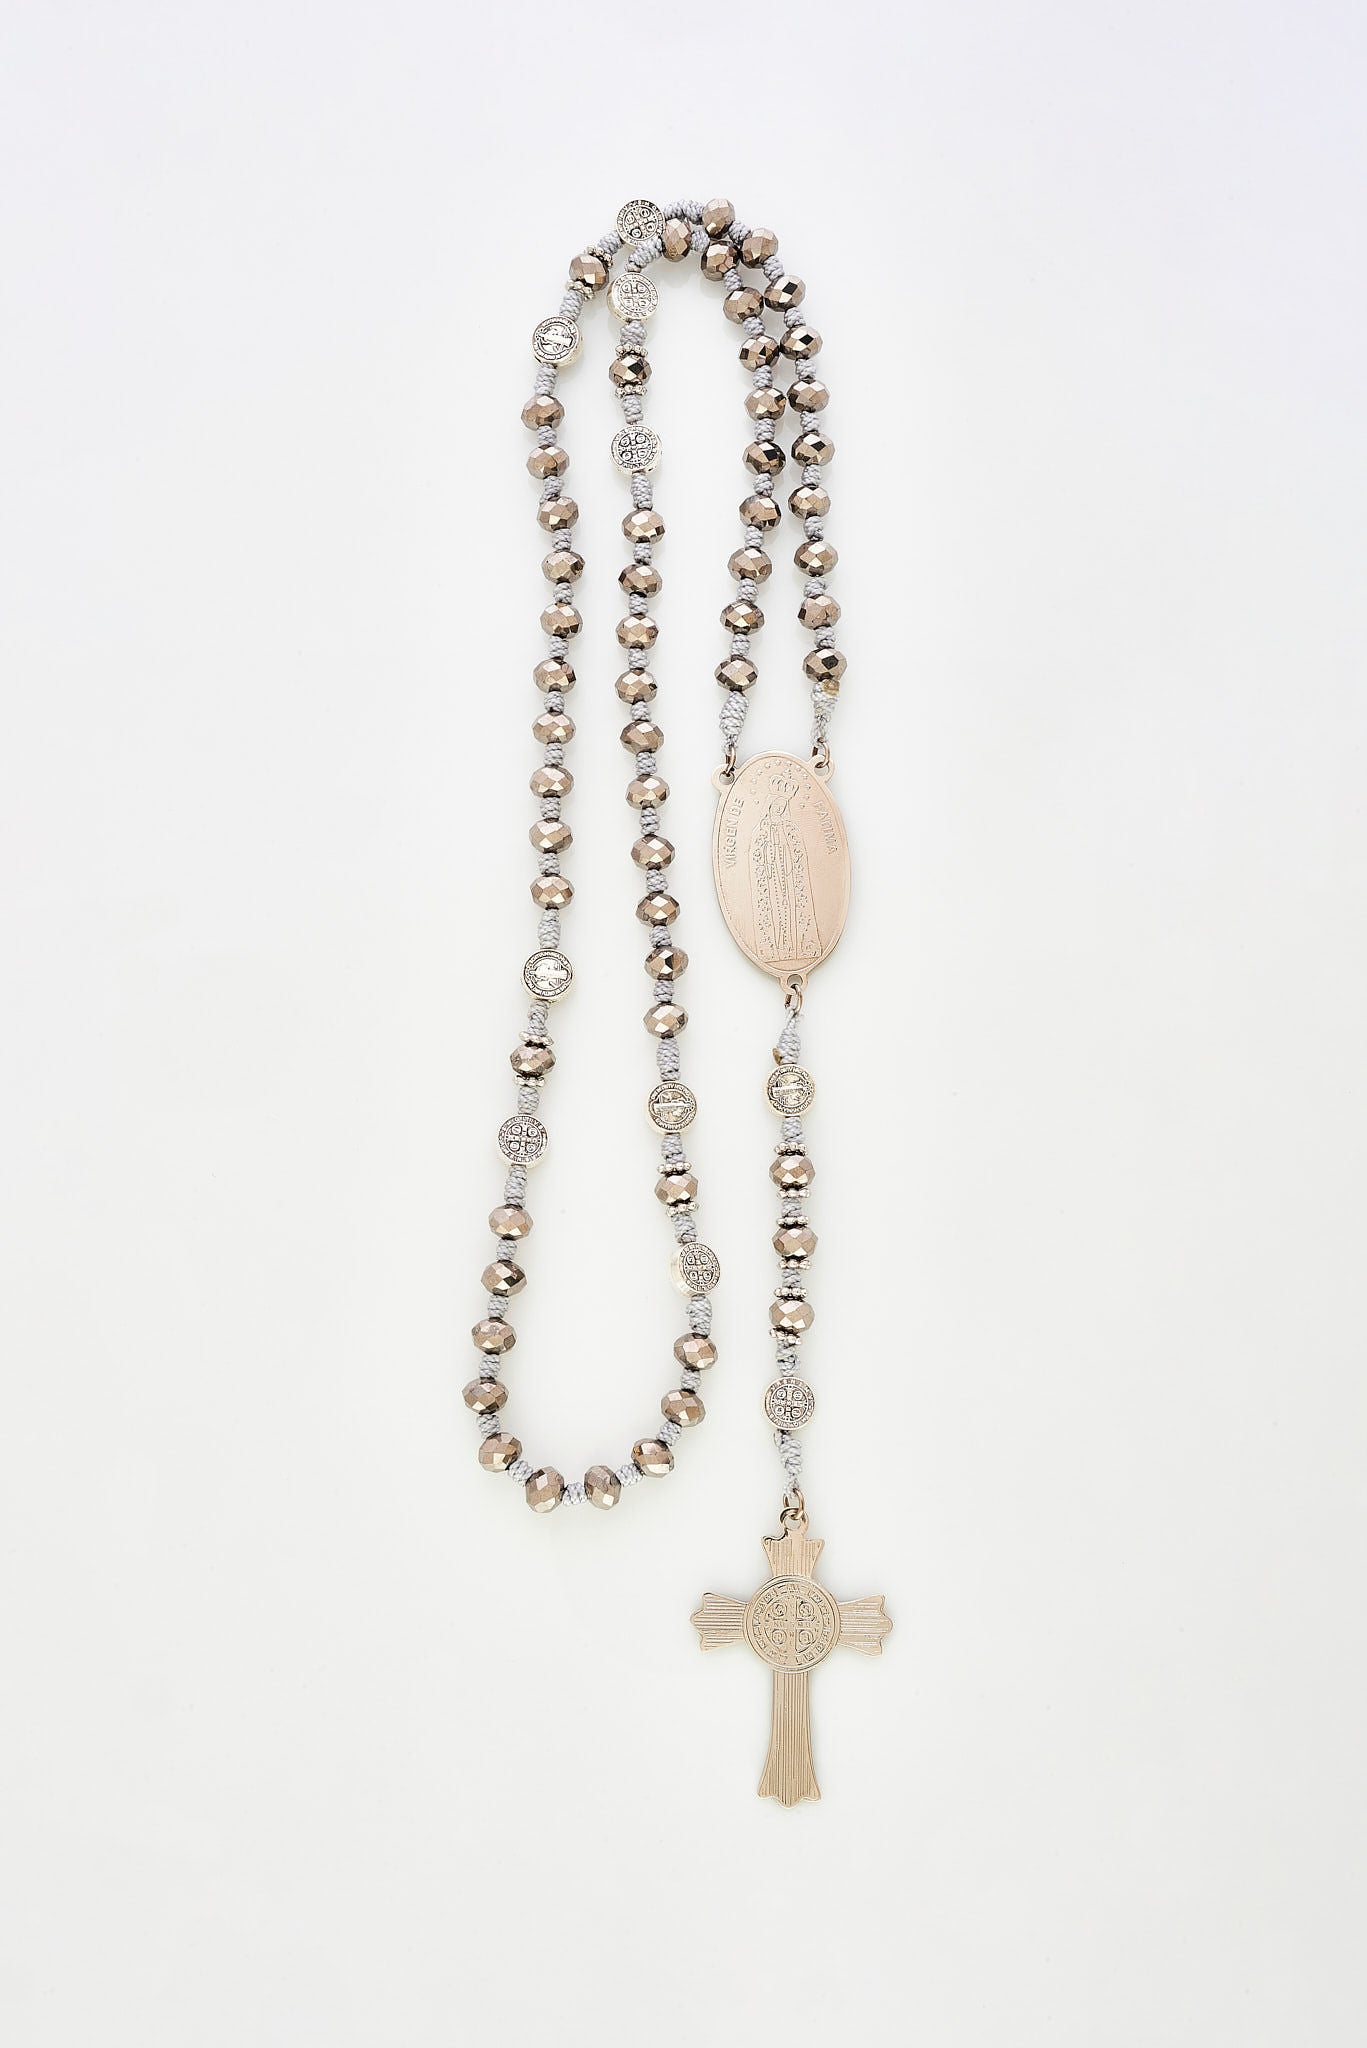 Men's collection rosary